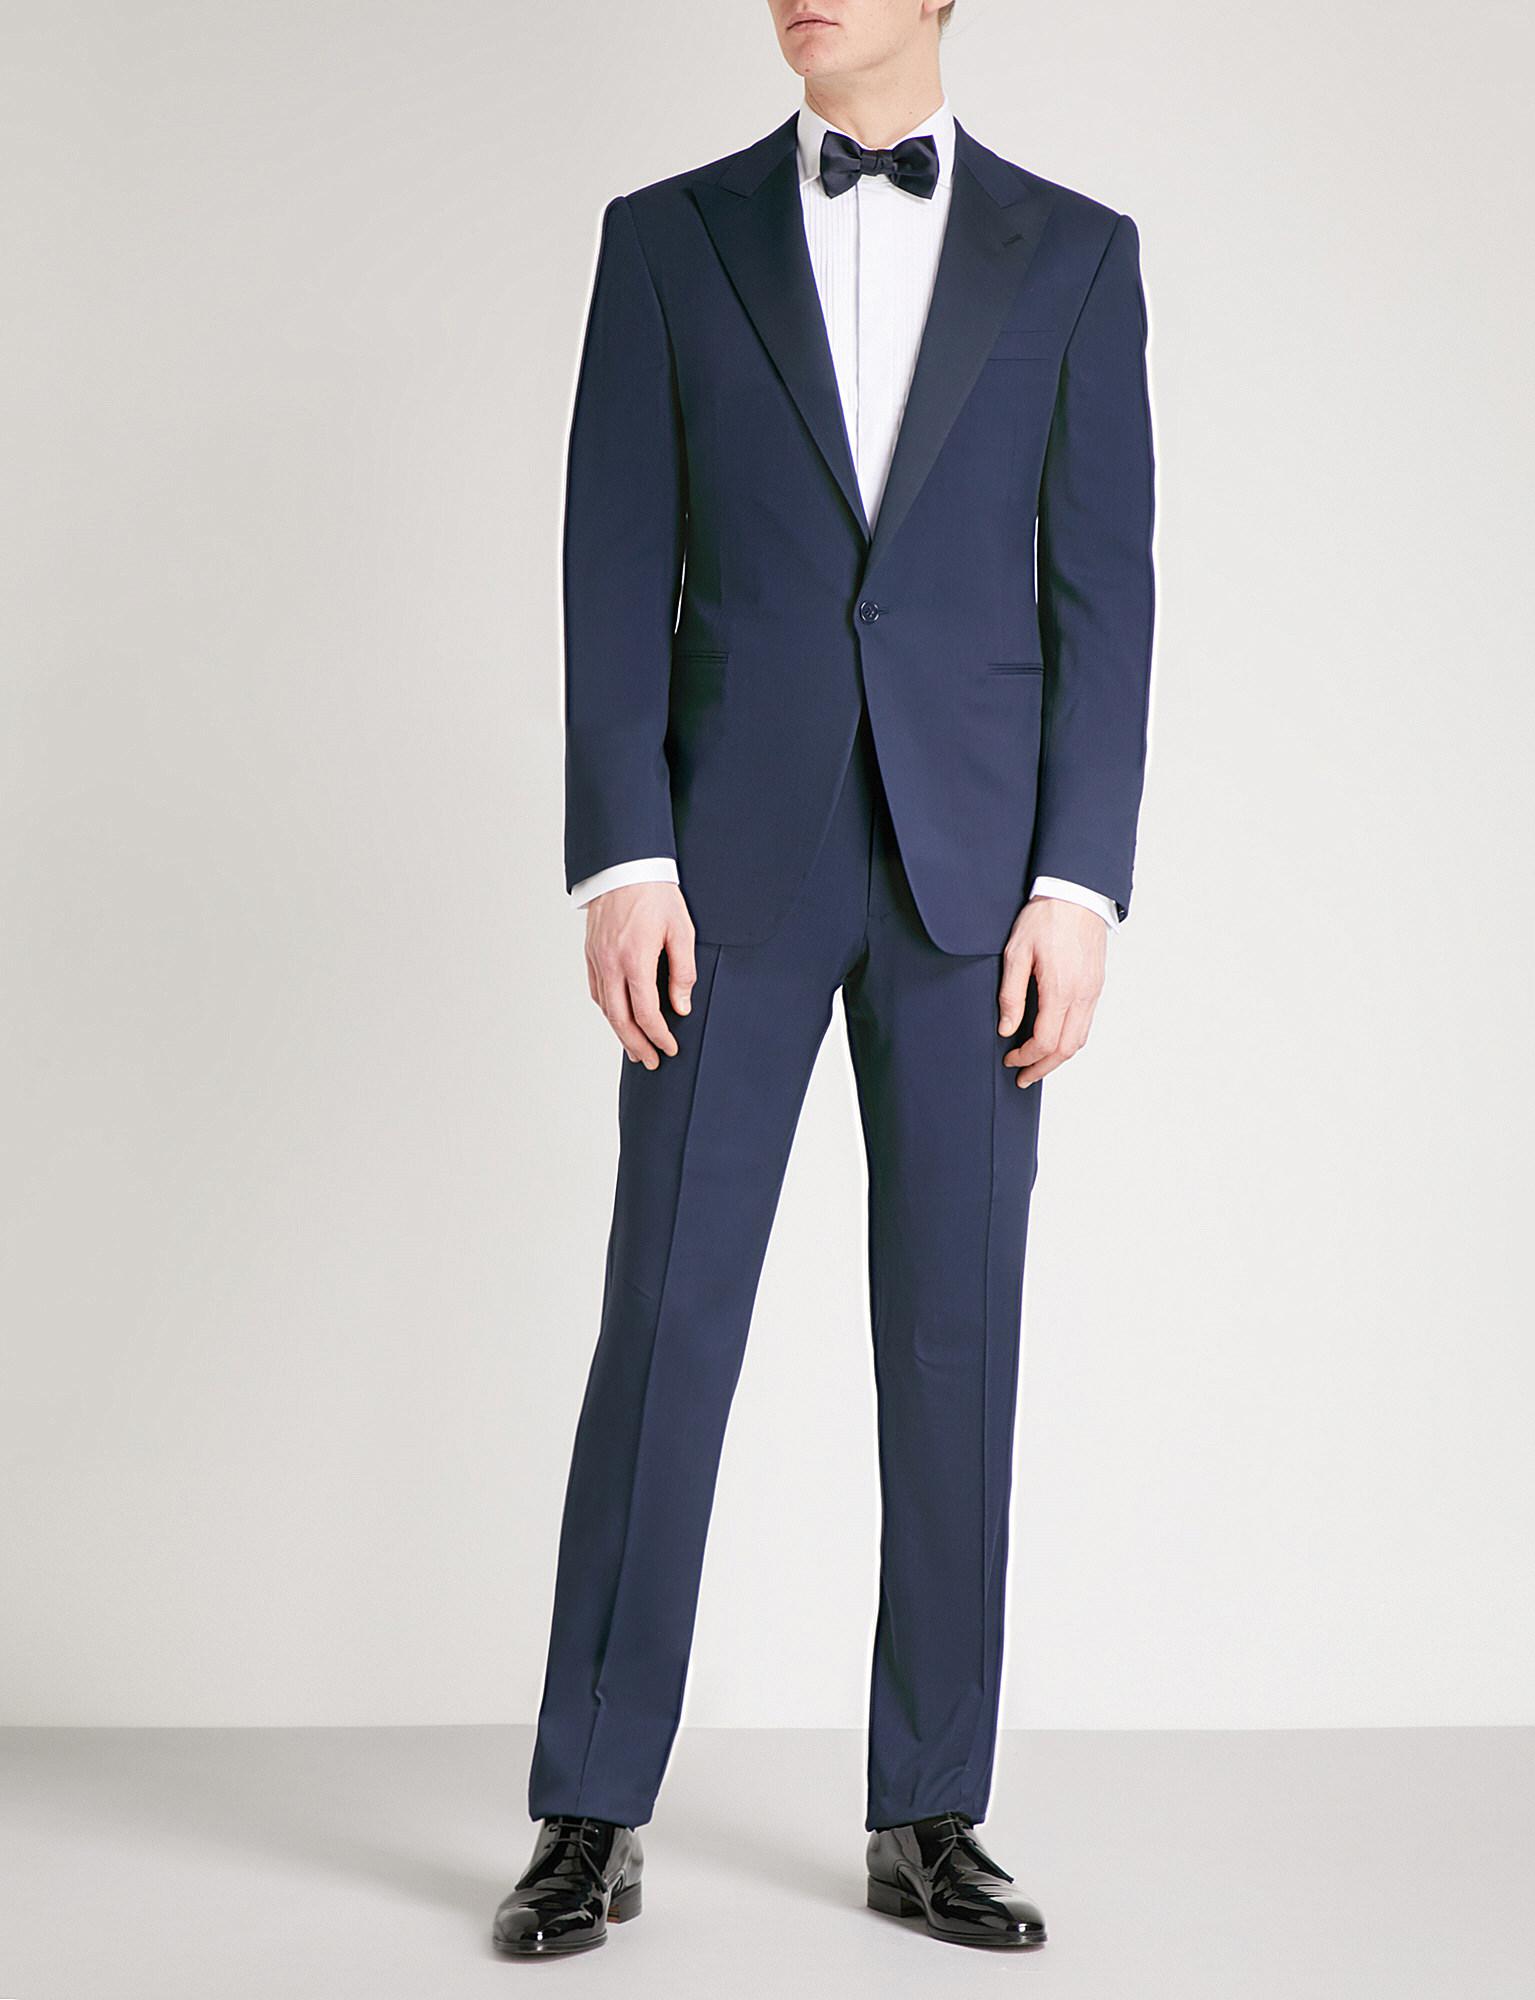 ralph lauren blue label suit > Up to 67% OFF > Free shipping